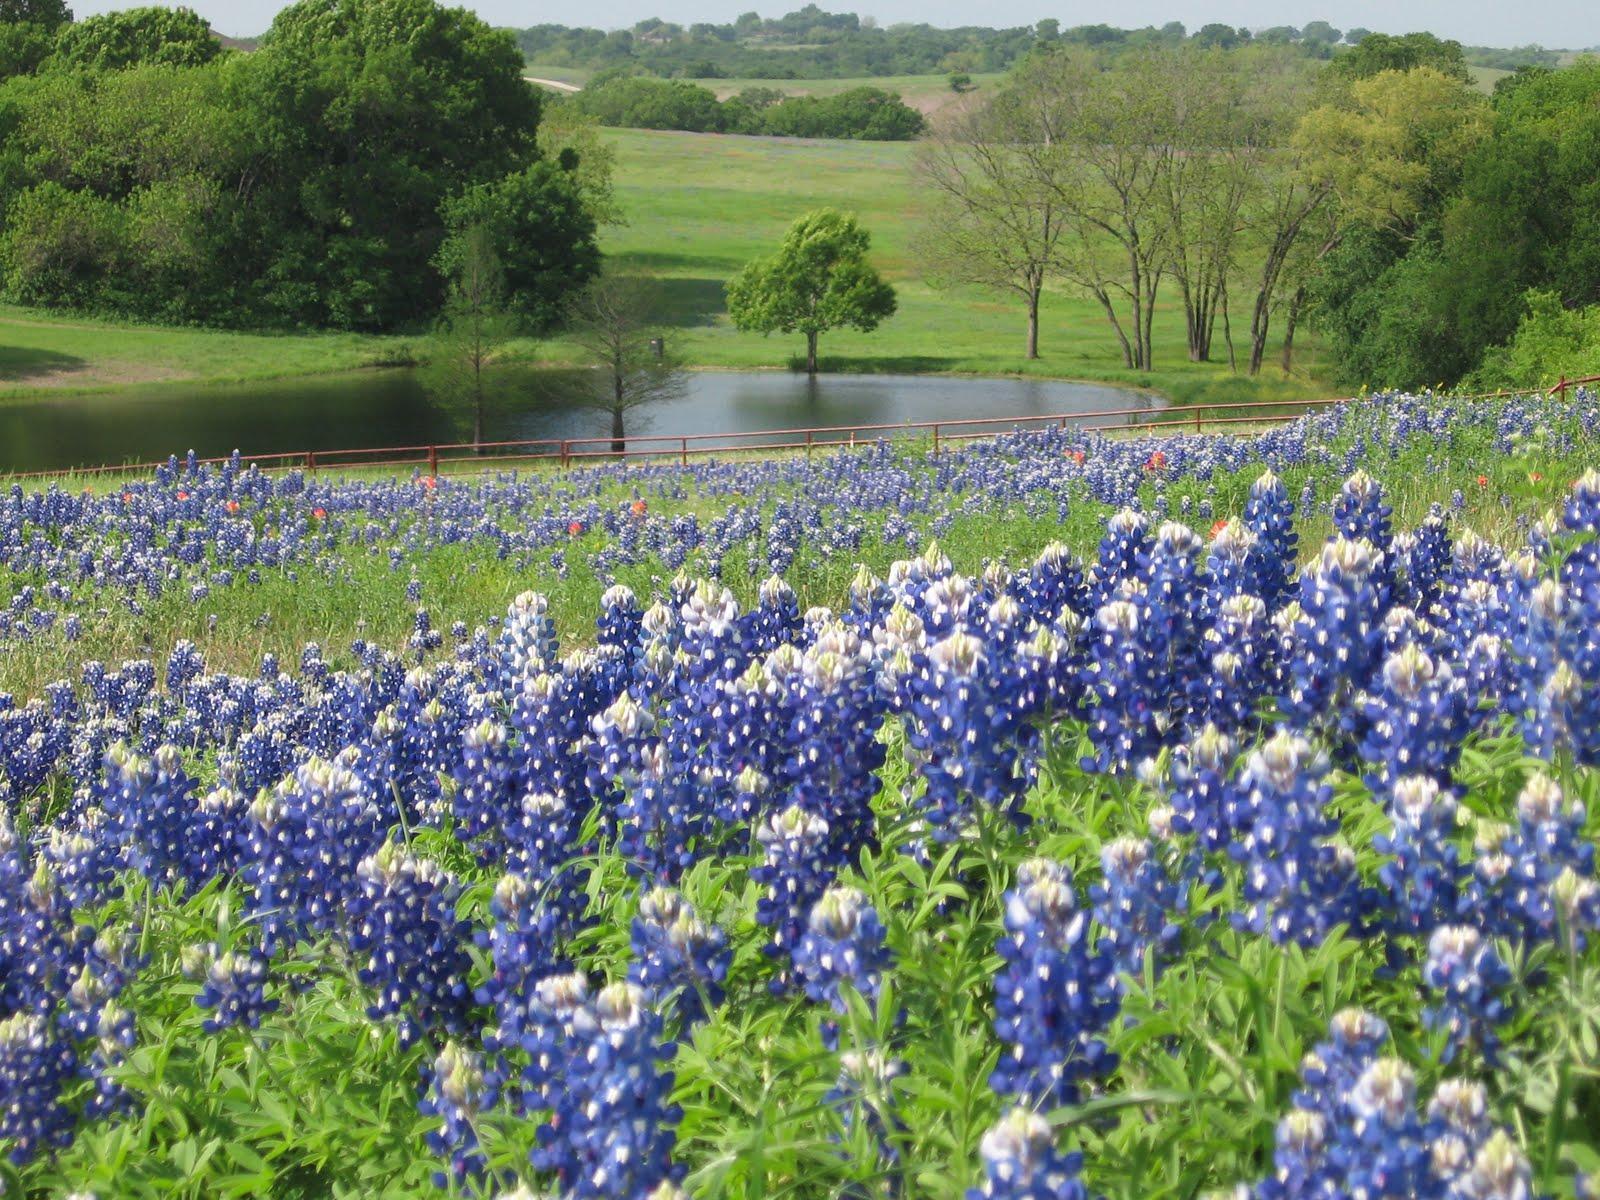 On The Bluebonnet Trail In Ennis, Texas with Gary: Bluebonnets Are